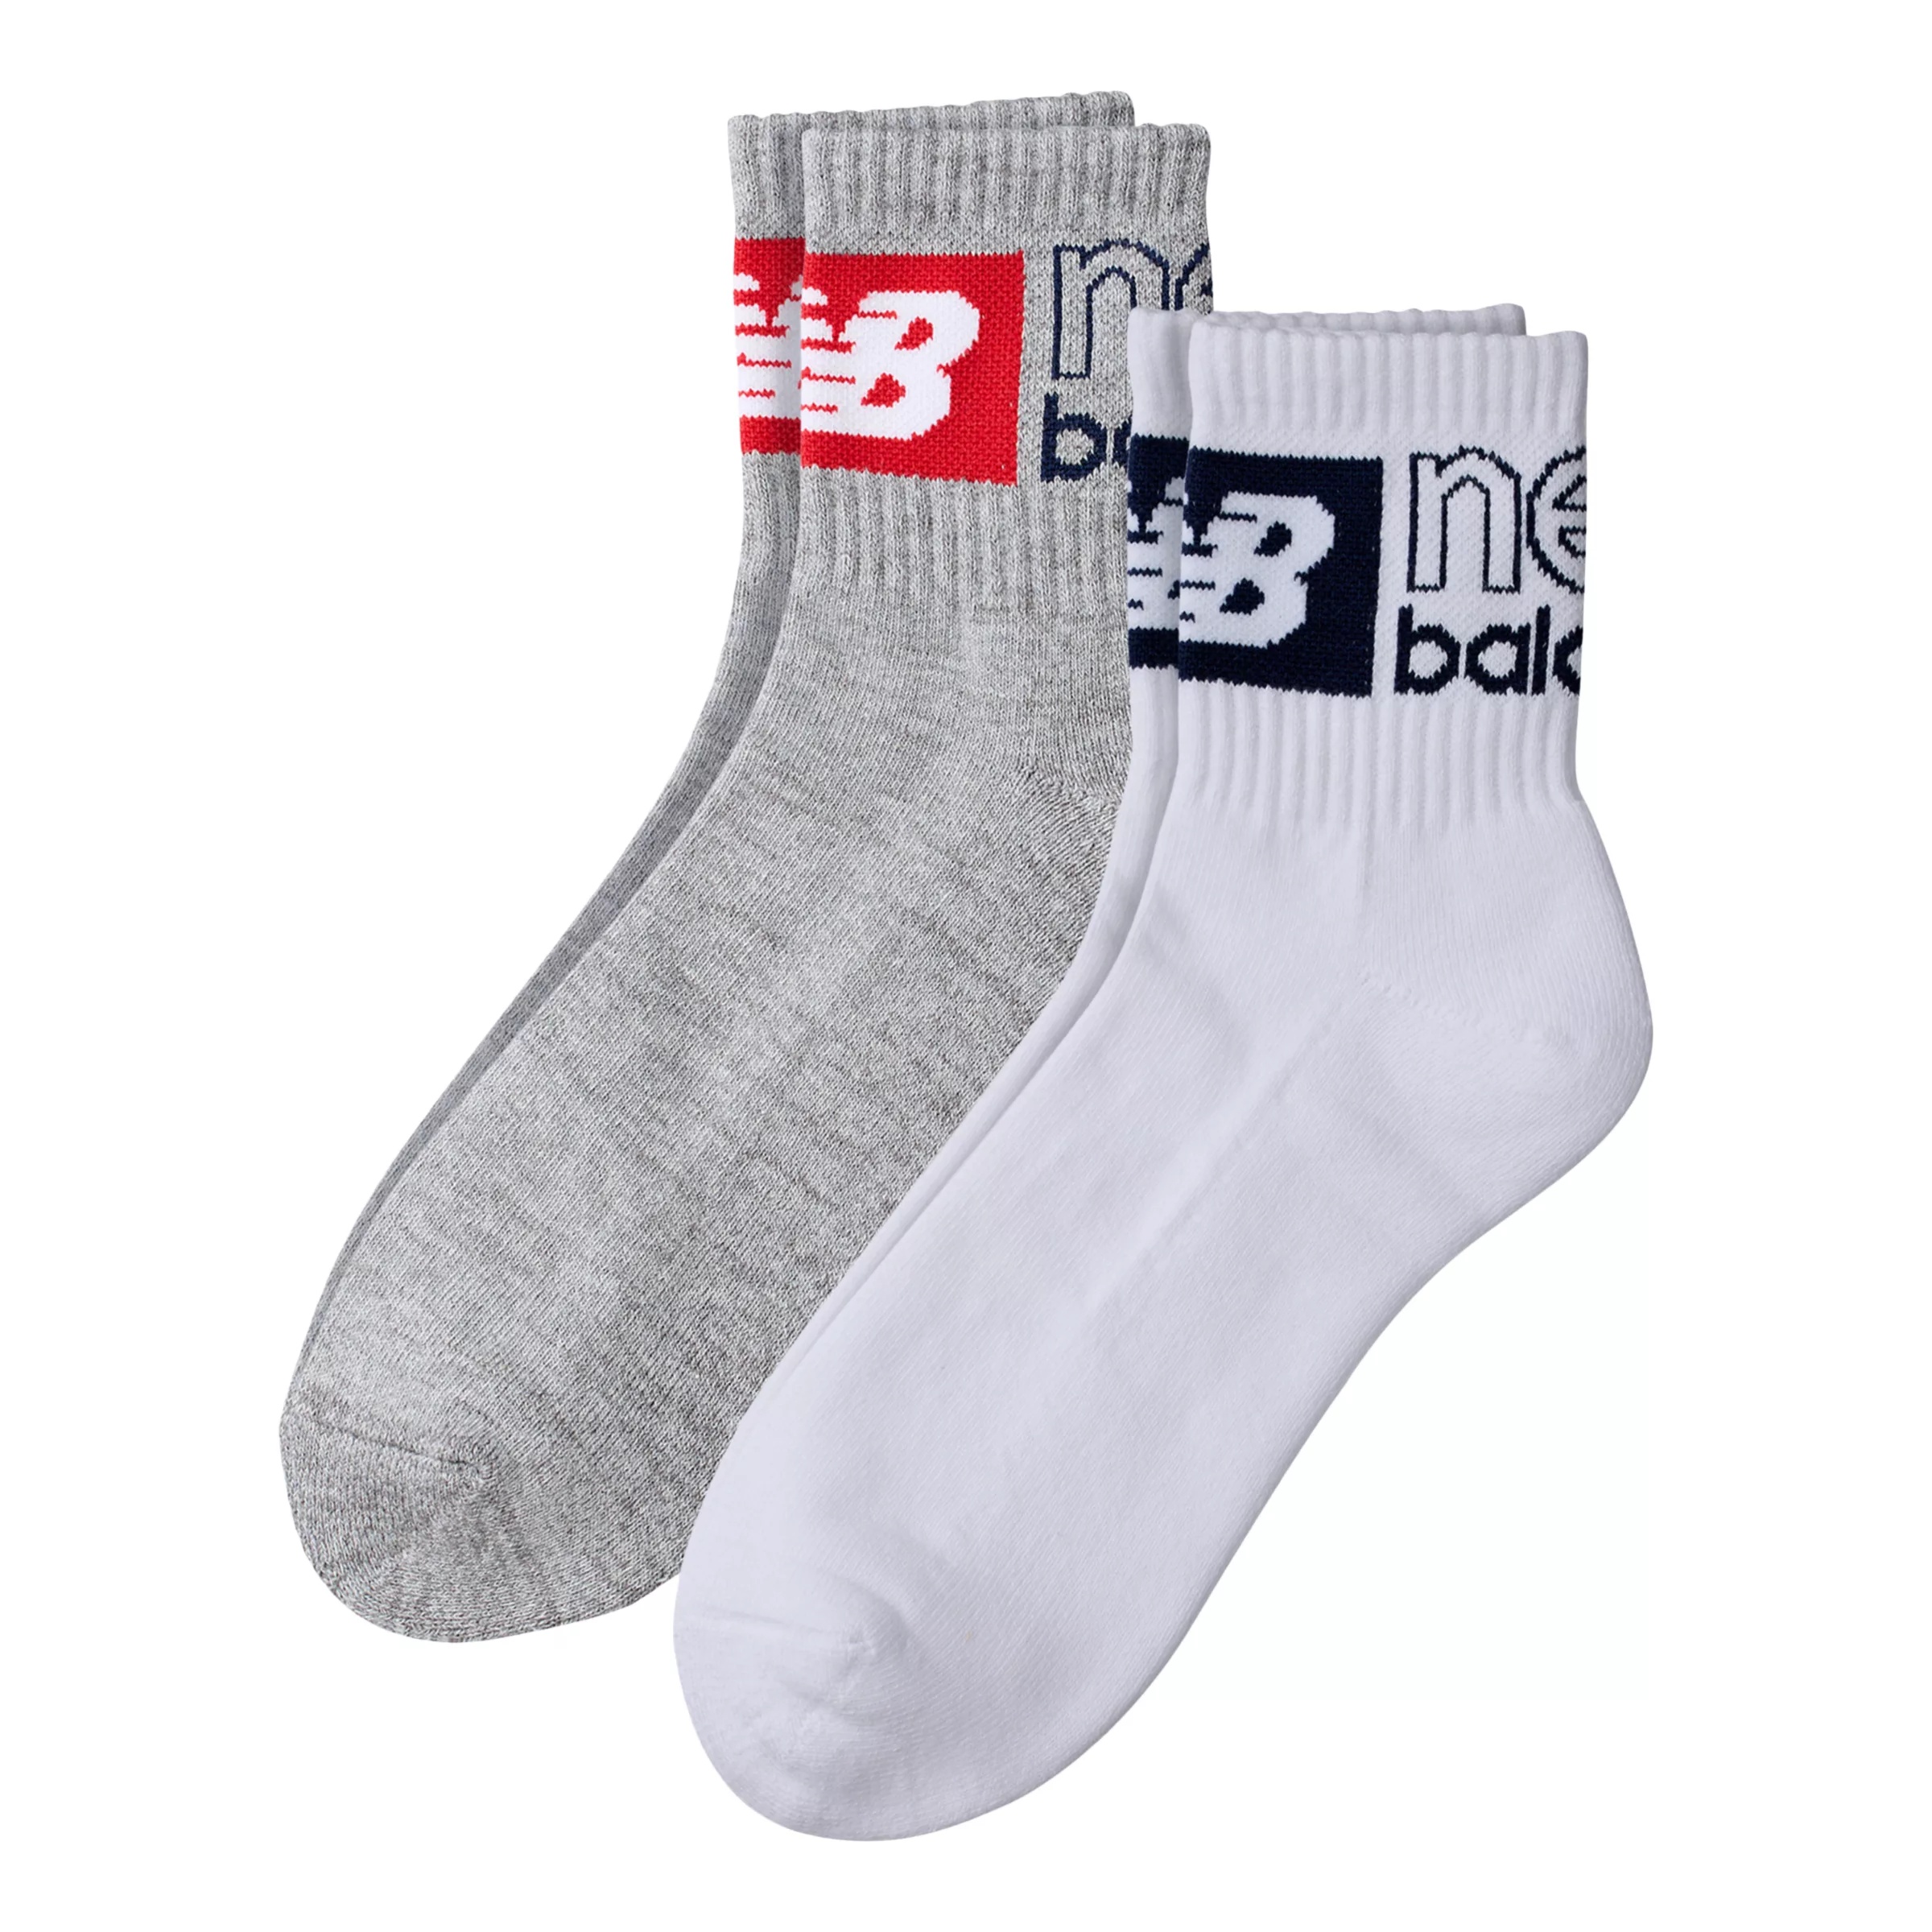 Sports Essentials Ankle Socks 2 Pack - 2